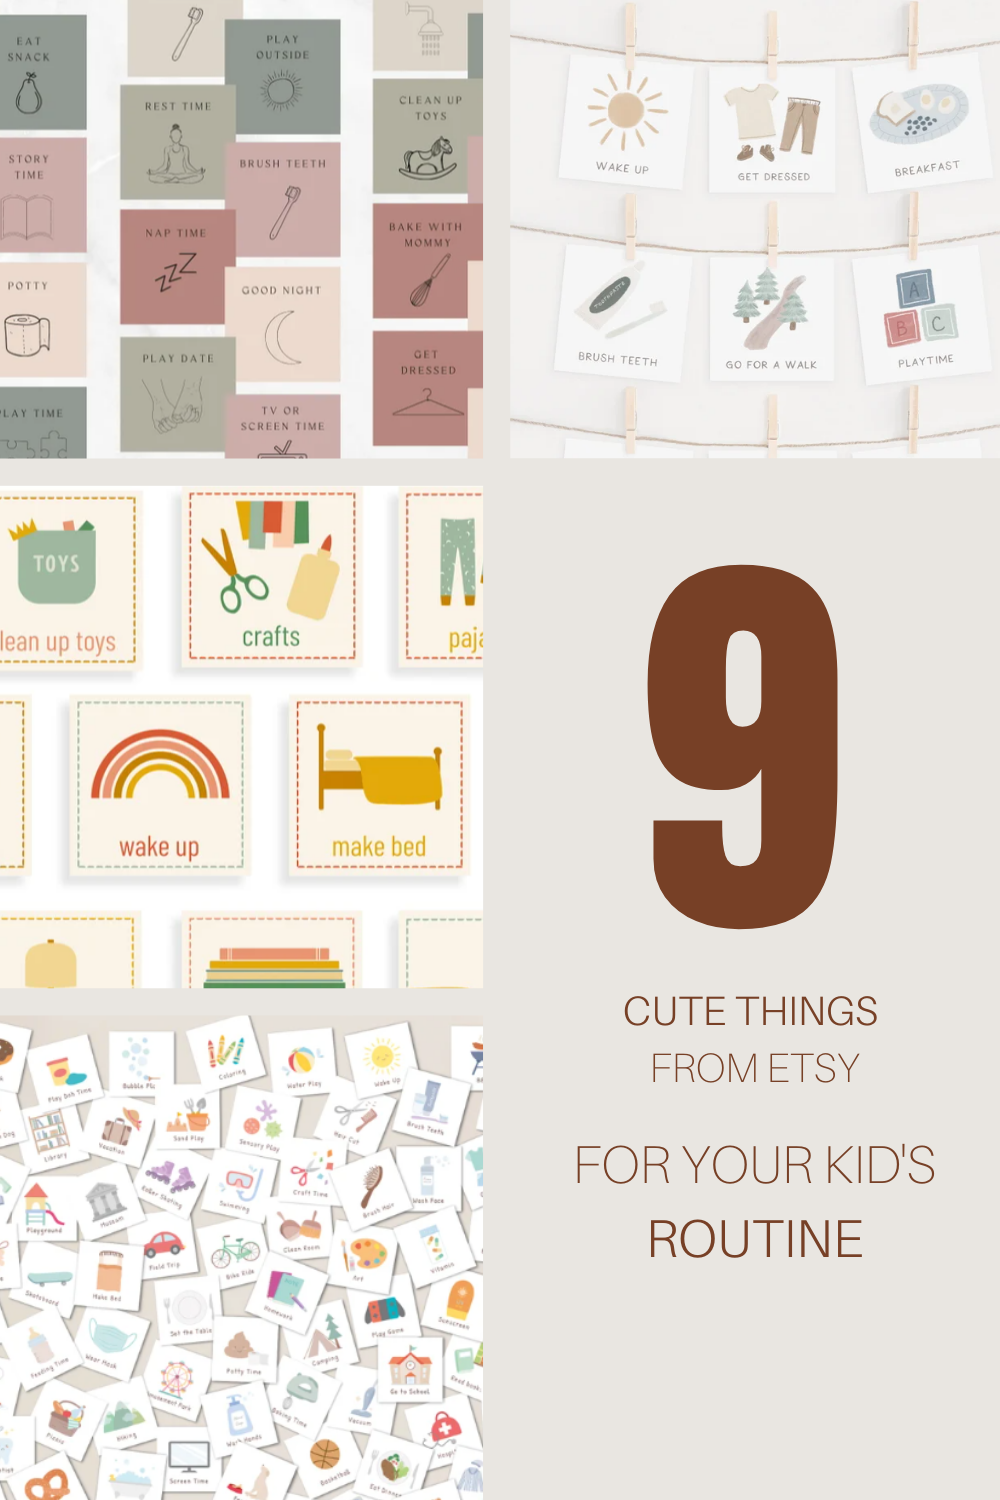 9 cute things from Etsy to help your kids with their routine